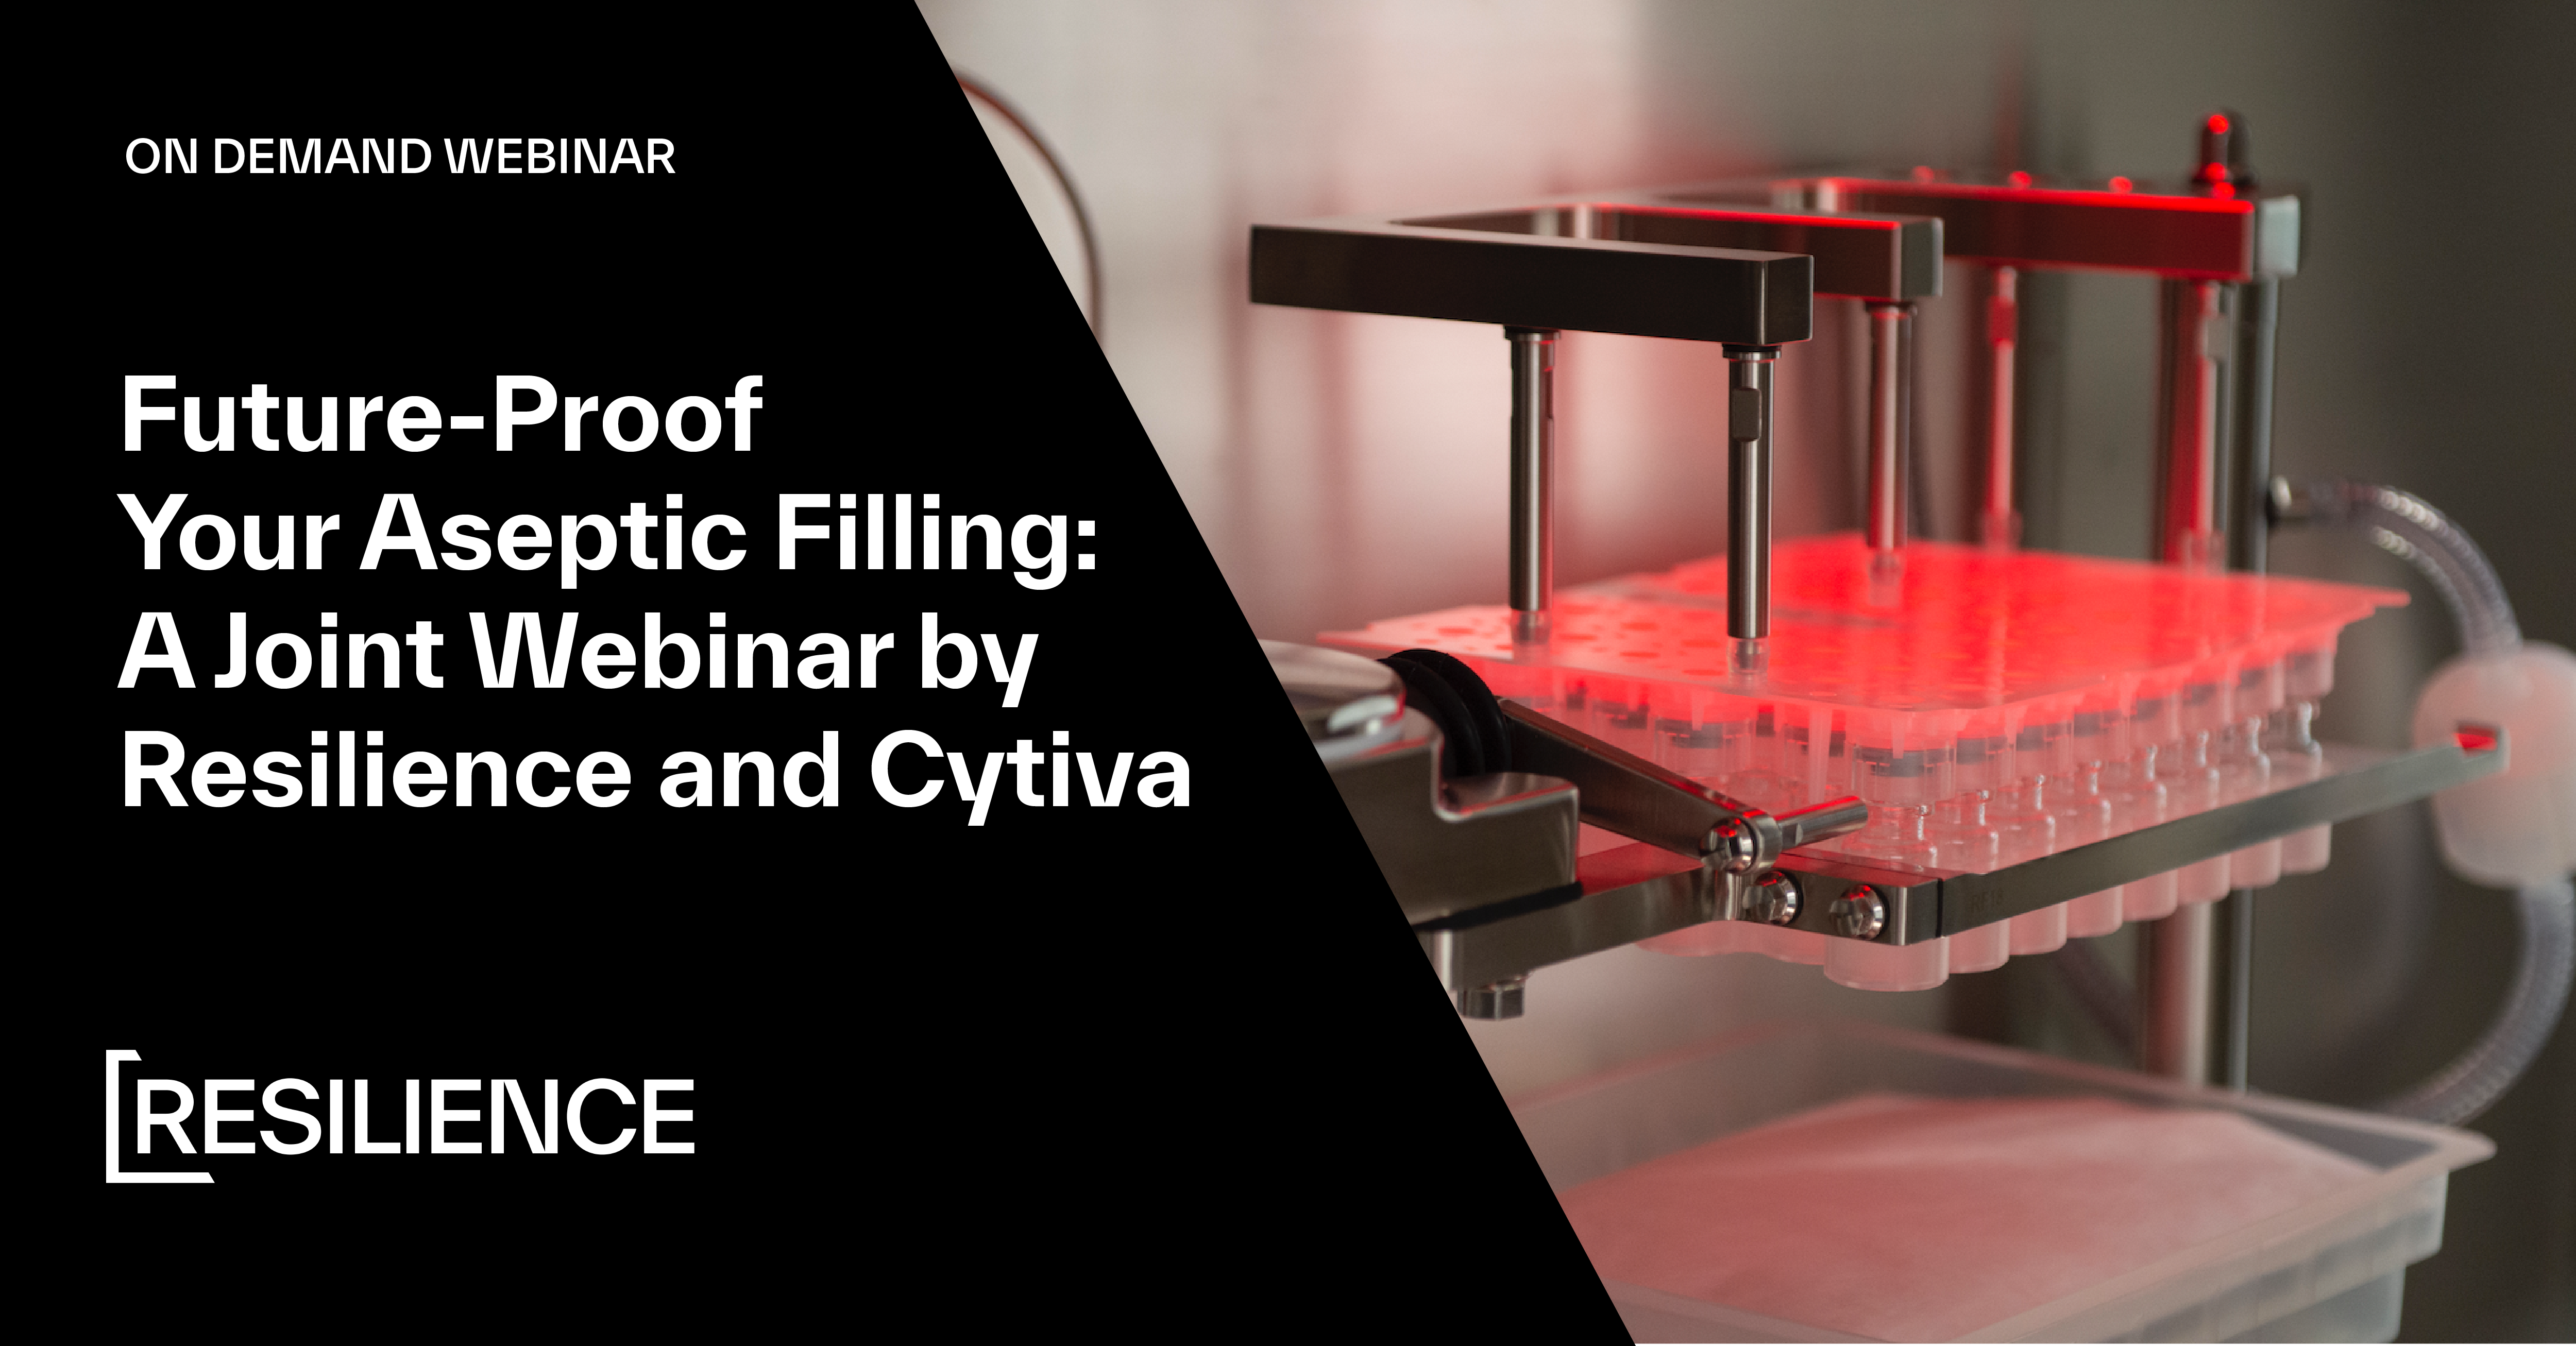 WEBINAR: Future-Proof Your Aseptic Filling-A Joint Webinar by Resilience and Cytiva